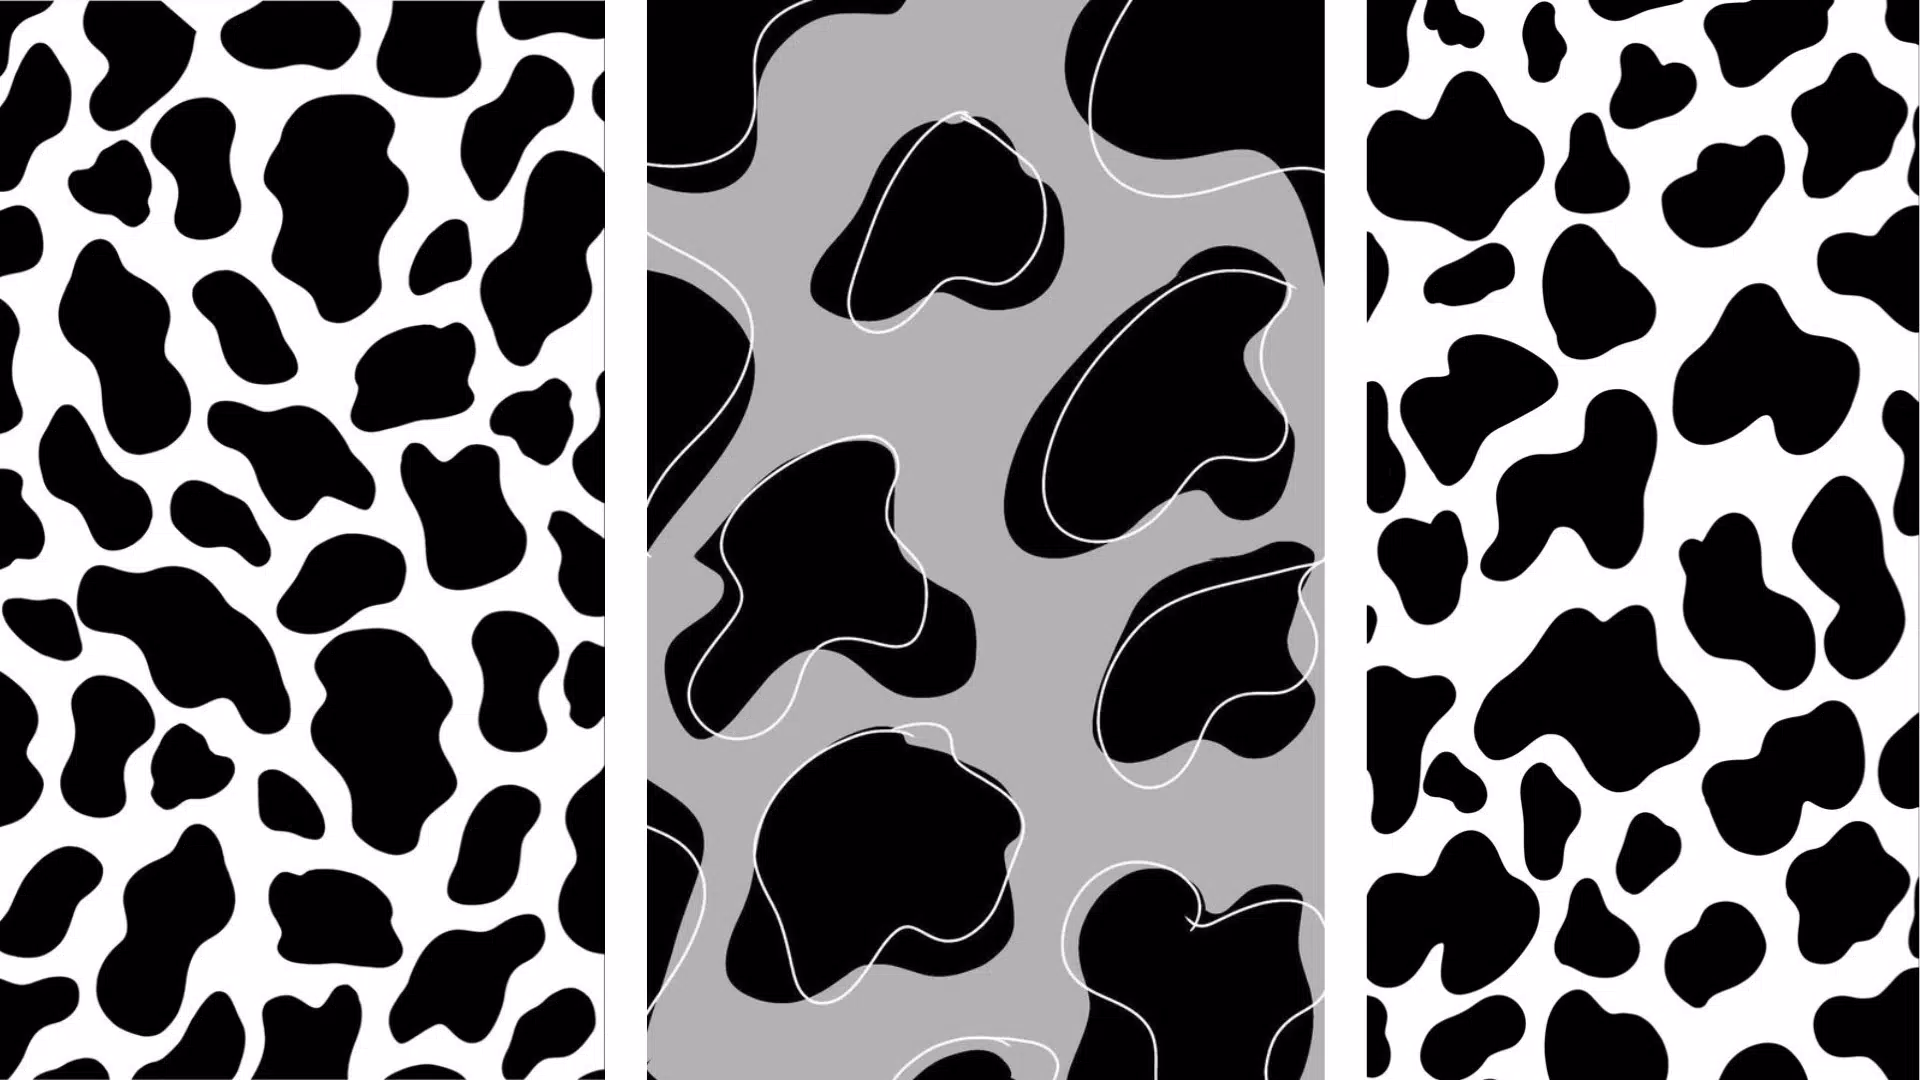 A set of black and white animal print patterns - Cow